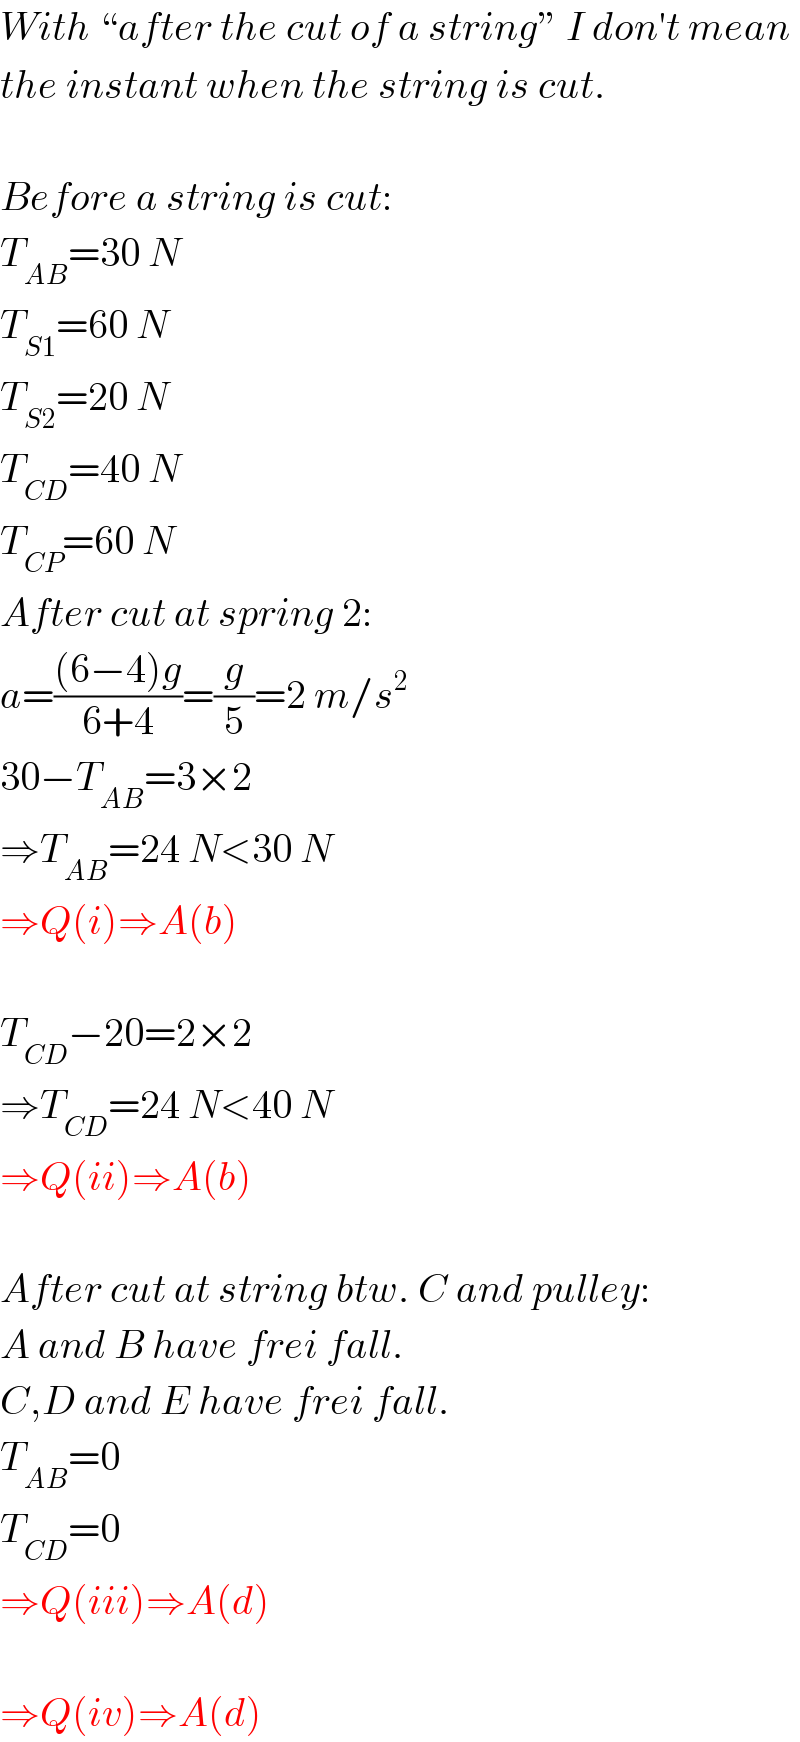 With “after the cut of a string” I don′t mean  the instant when the string is cut.    Before a string is cut:  T_(AB) =30 N  T_(S1) =60 N  T_(S2) =20 N  T_(CD) =40 N  T_(CP) =60 N  After cut at spring 2:  a=(((6−4)g)/(6+4))=(g/5)=2 m/s^2   30−T_(AB) =3×2  ⇒T_(AB) =24 N<30 N  ⇒Q(i)⇒A(b)    T_(CD) −20=2×2  ⇒T_(CD) =24 N<40 N  ⇒Q(ii)⇒A(b)    After cut at string btw. C and pulley:  A and B have frei fall.  C,D and E have frei fall.  T_(AB) =0  T_(CD) =0  ⇒Q(iii)⇒A(d)    ⇒Q(iv)⇒A(d)  